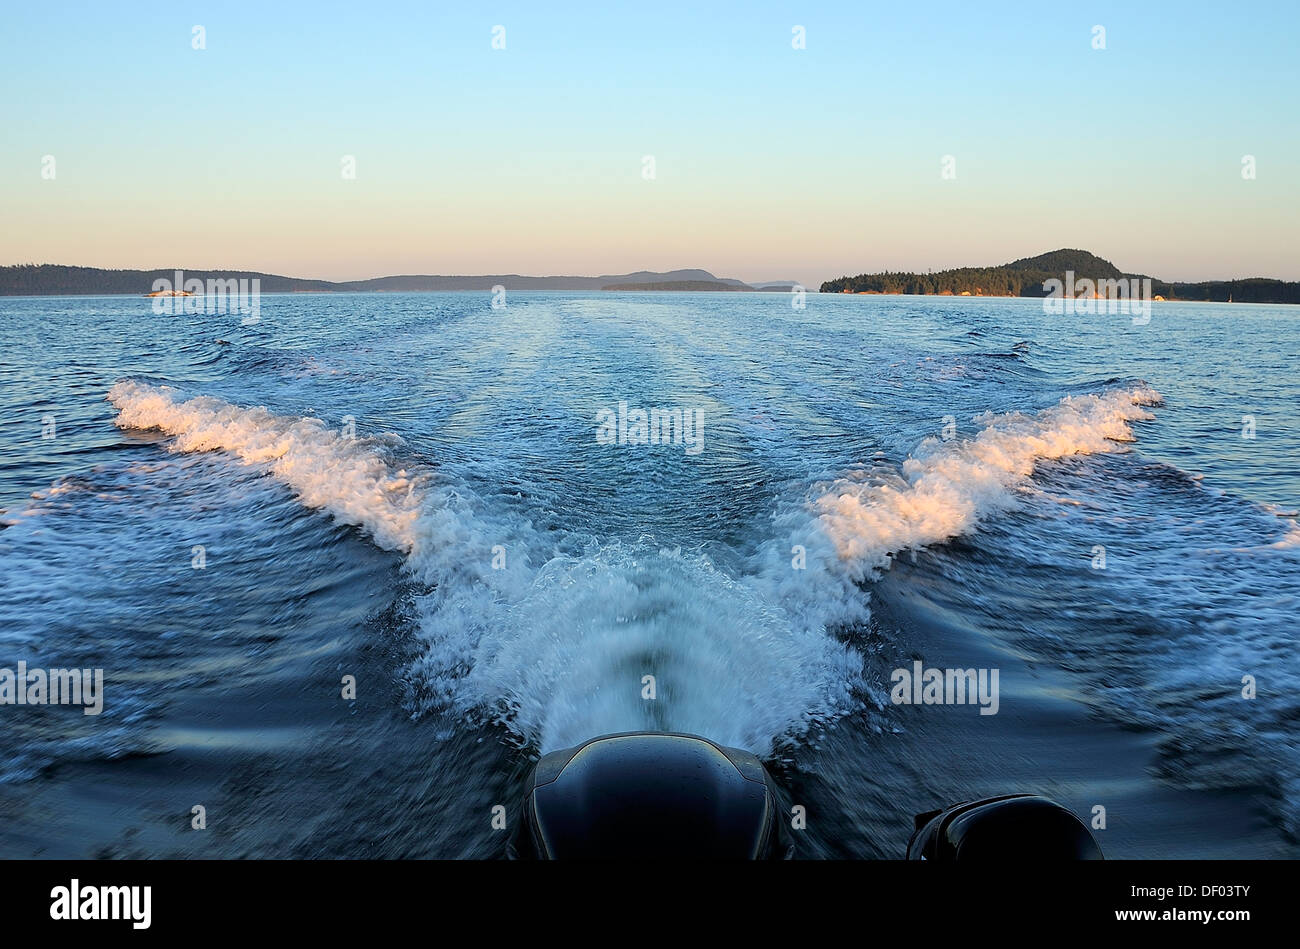 A v shaped wake from the boat makes an impressive scene in the water. Stock Photo